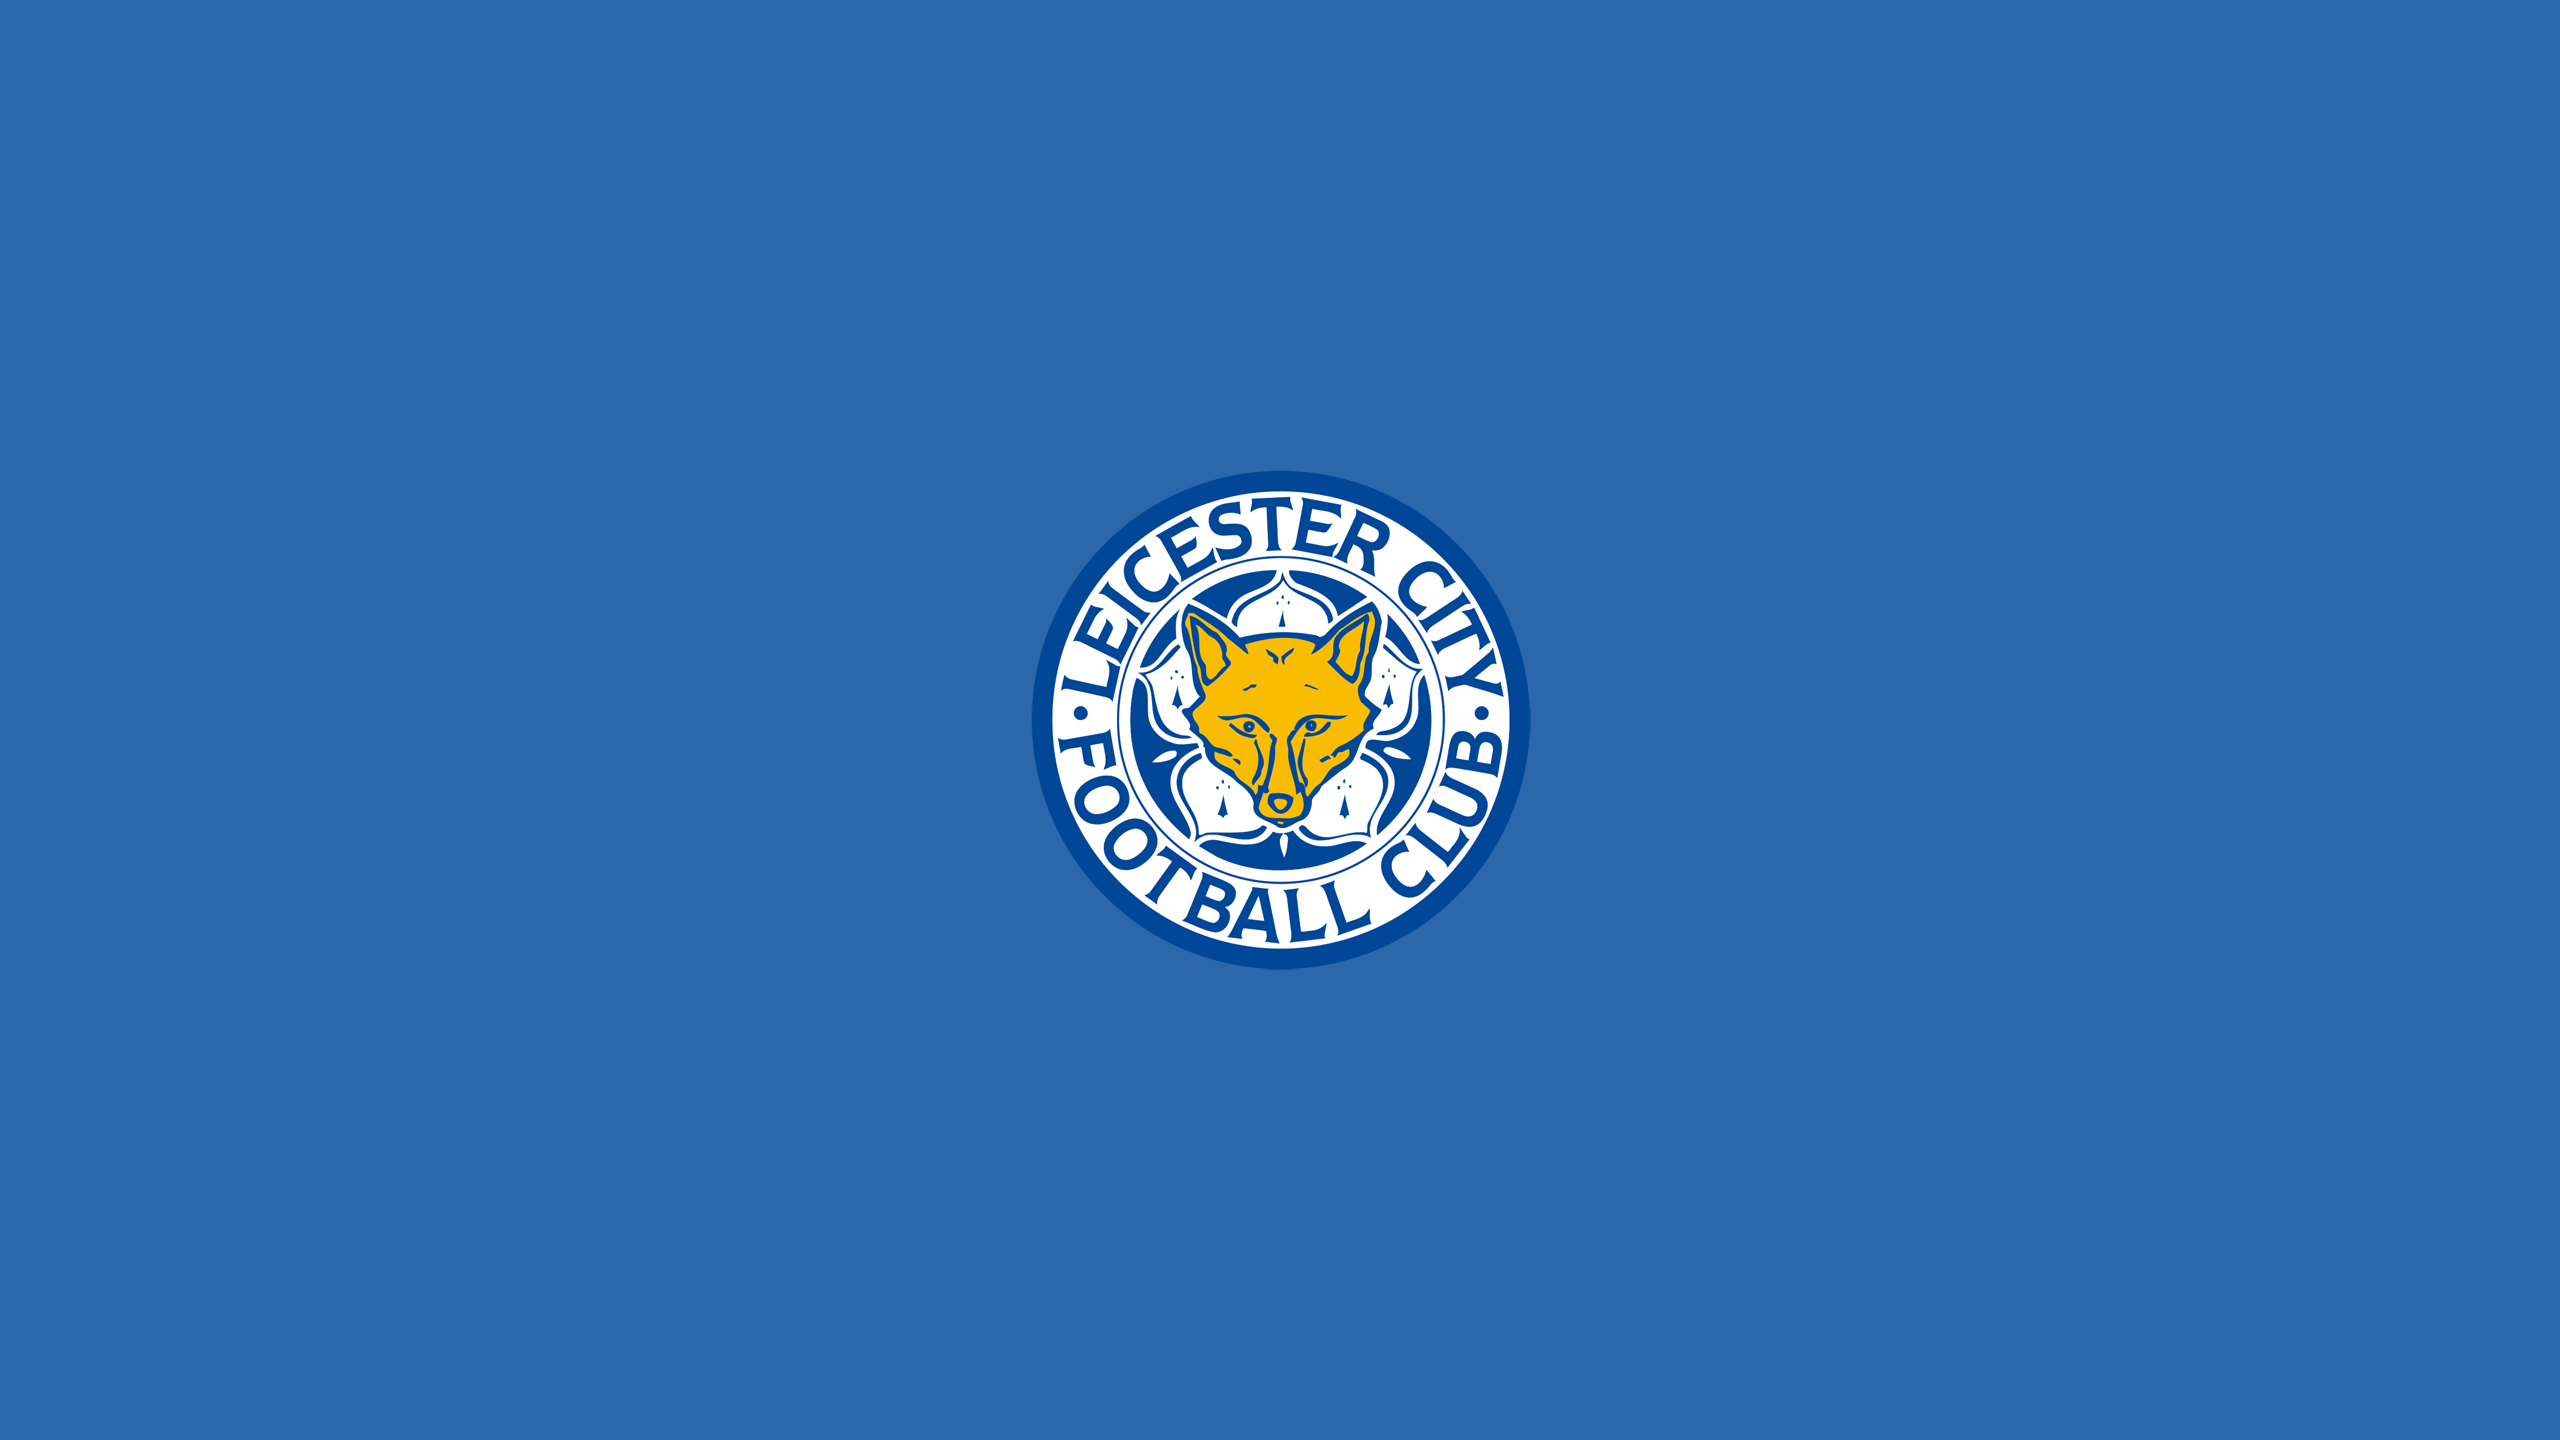 Leicester City FC related post by Premier-league.xyz